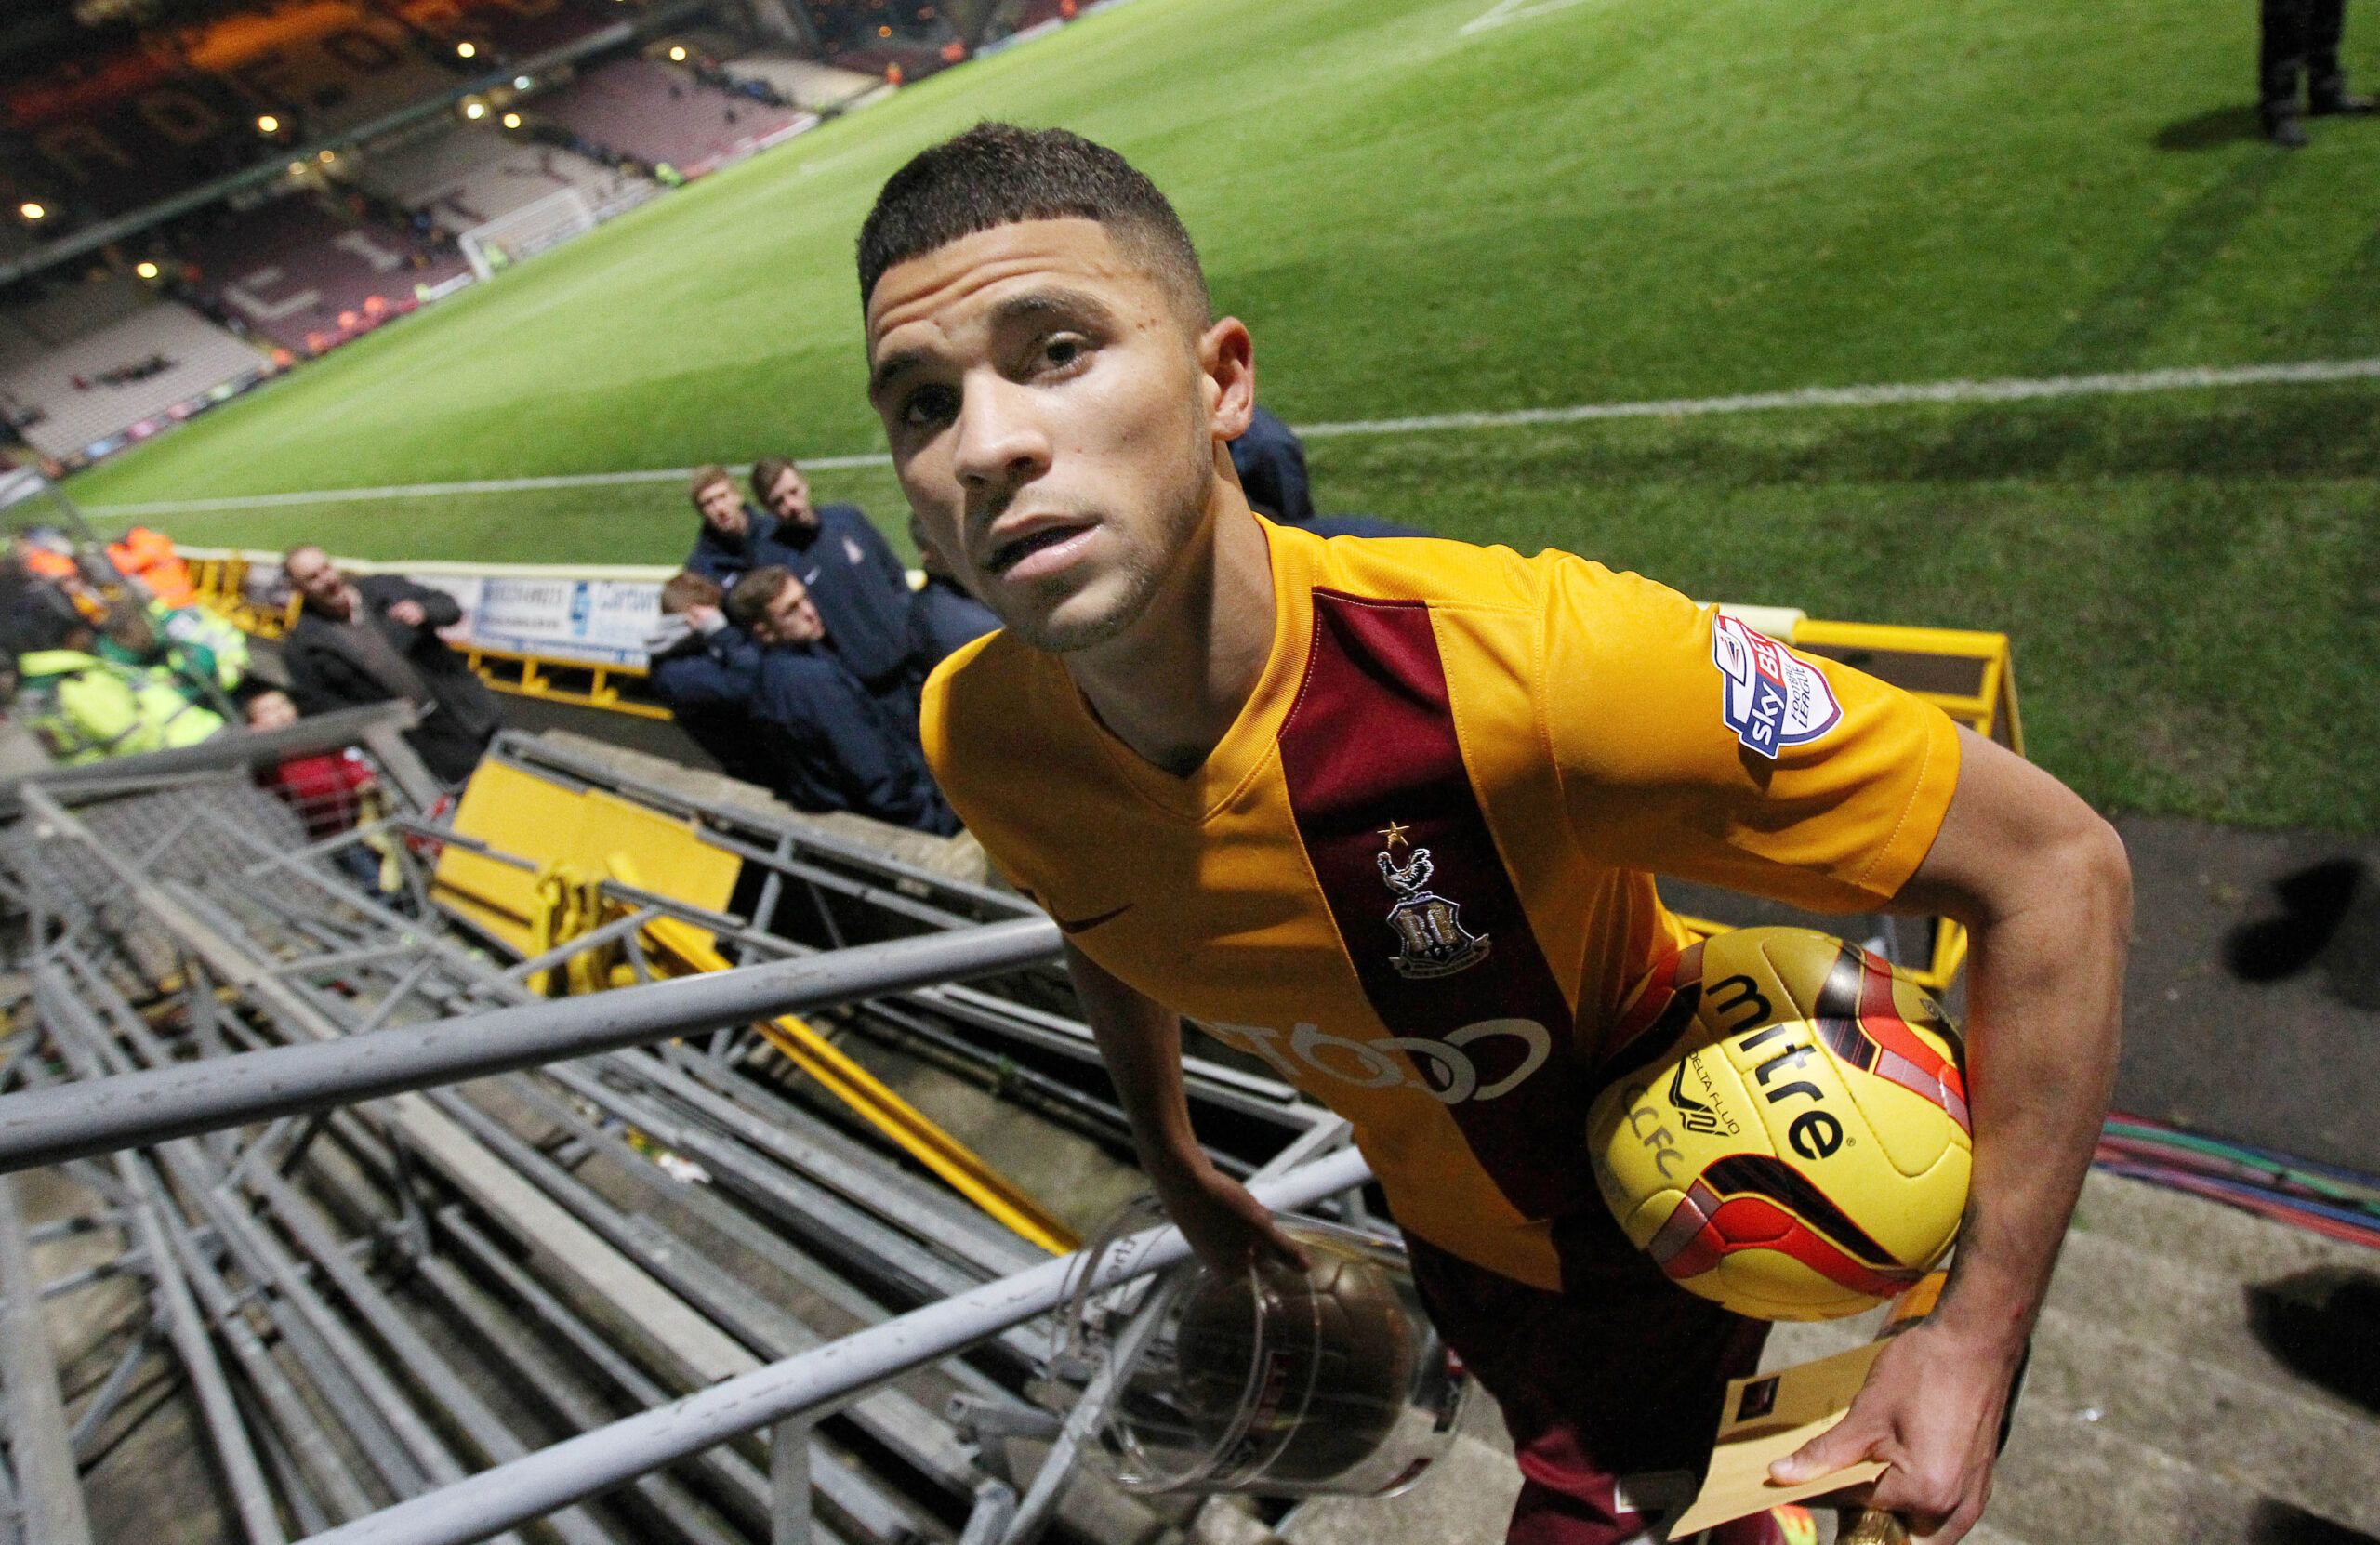 Football - Bradford City v Coventry City - Sky Bet Football League One - The Coral Windows Stadium, Valley Parade - 17/11/13 
Nahki Wells of Bradford City leaves the pitch with the matchball after scoring a hat trick 
Mandatory Credit: Action Images / Ed Sykes 
Livepic 
EDITORIAL USE ONLY. No use with unauthorized audio, video, data, fixture lists, club/league logos or live services. Online in-match use limited to 45 images, no video emulation. No use in betting, games or single club/league/play